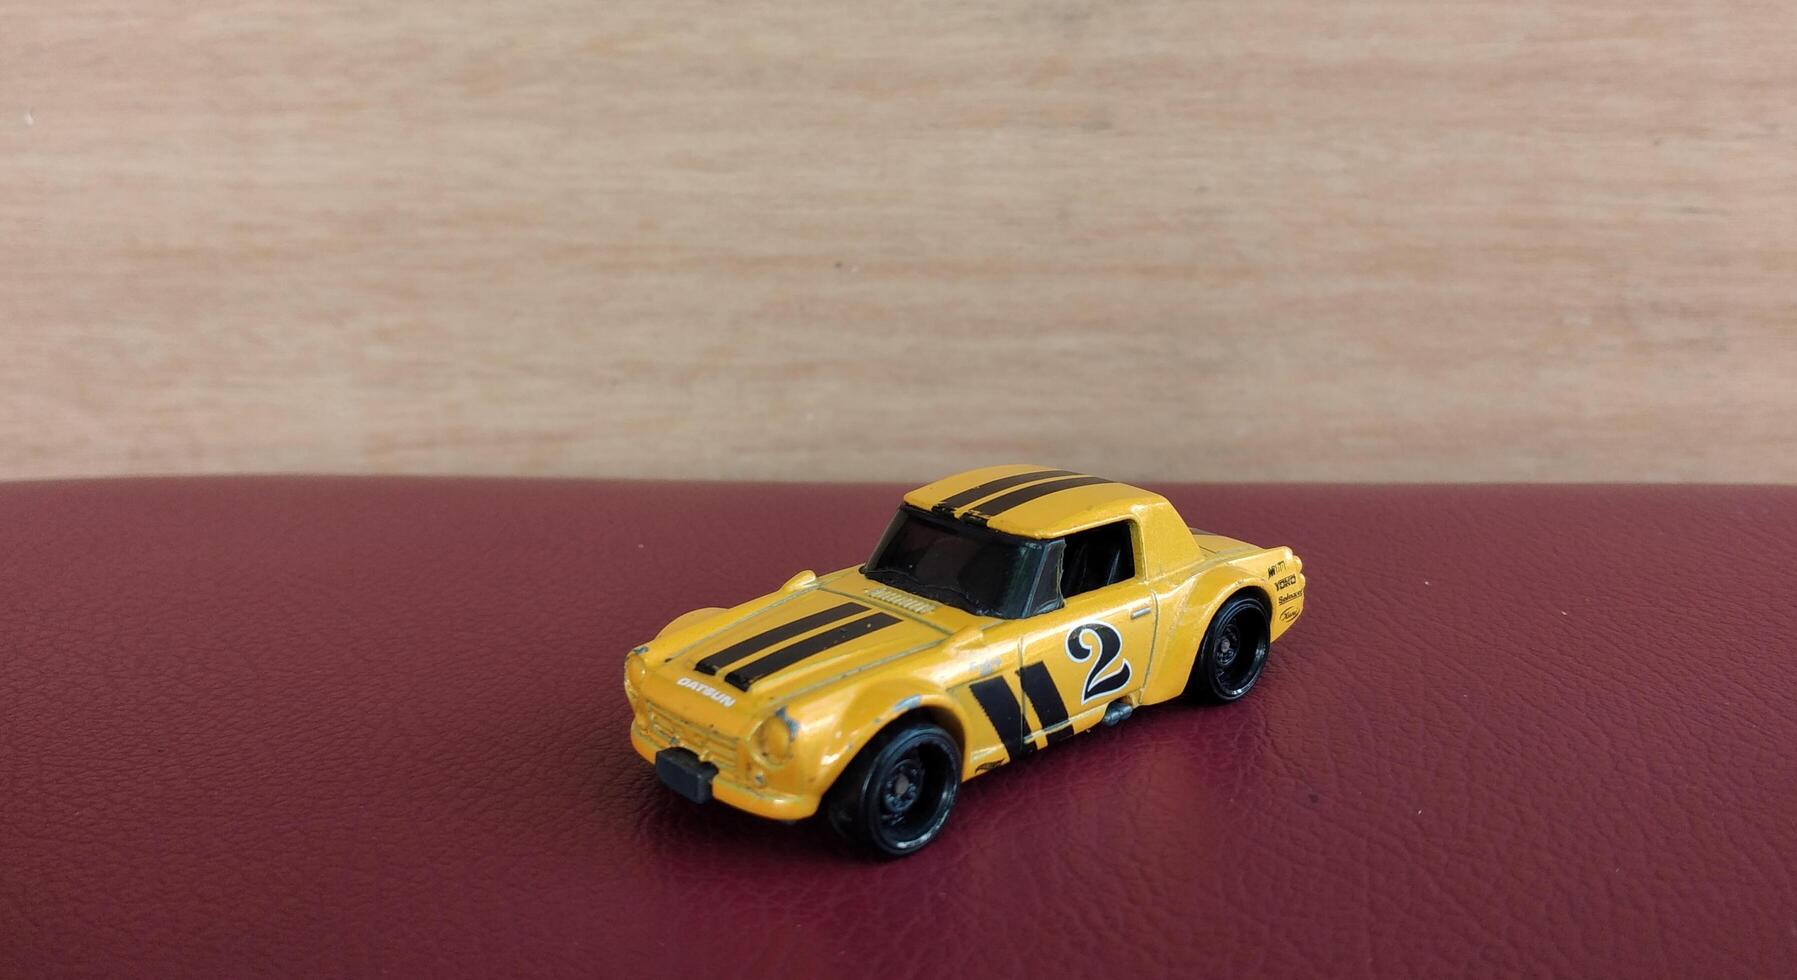 Miniature yellow car toy on red background with copy space for text photo